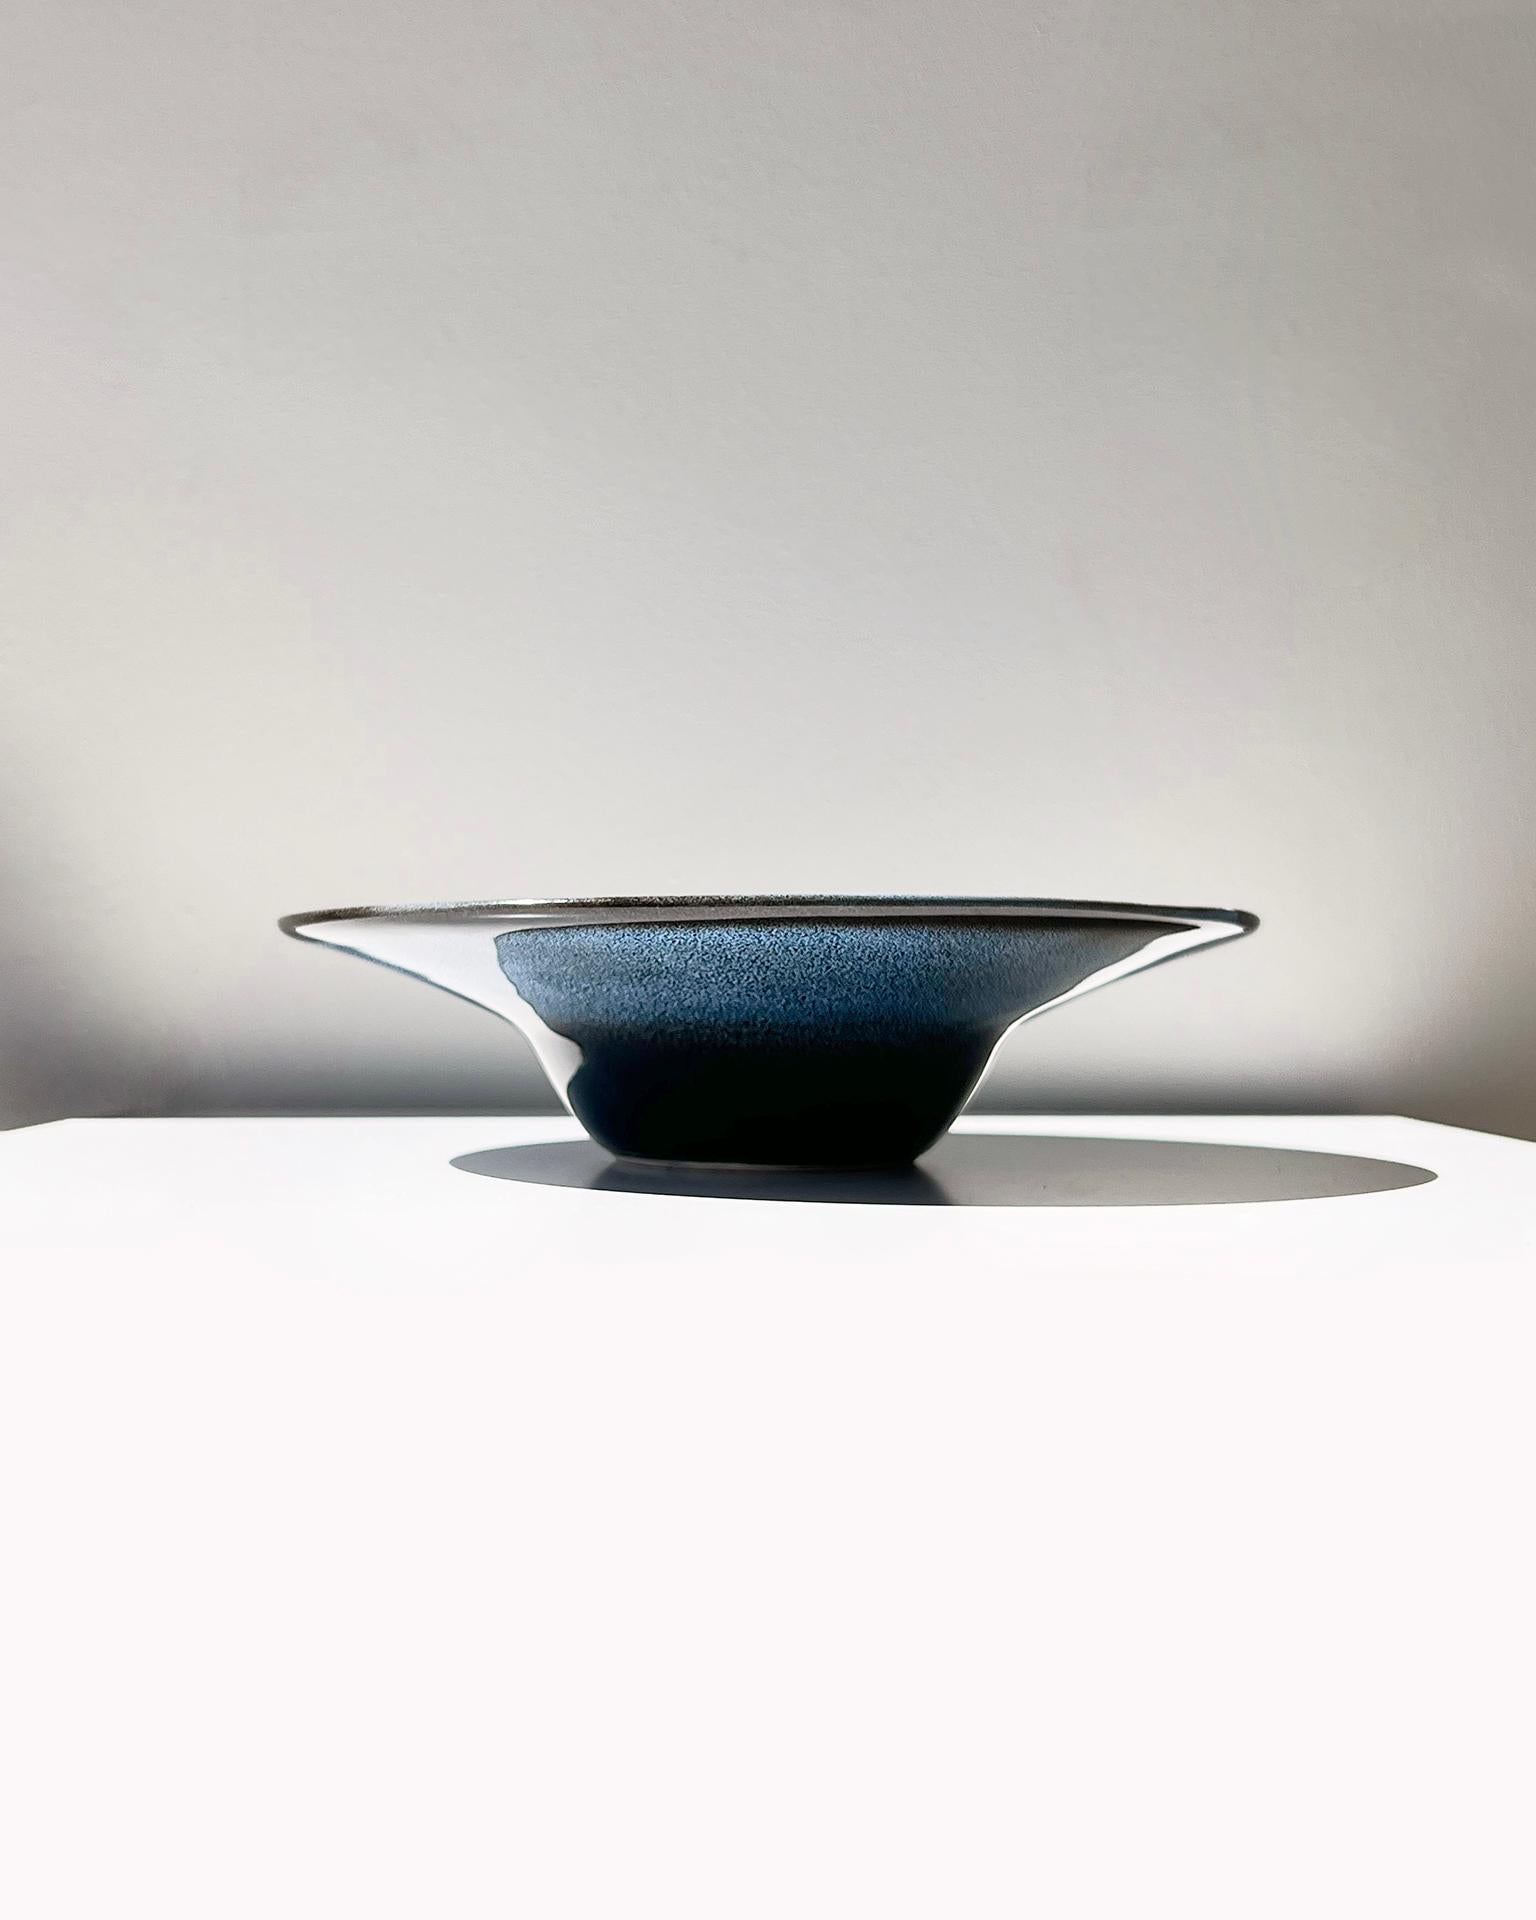 An elegant bowl to serve your favorite paella. This Anna Indigo Handmade Serving Bowl adds a touch of elegance to any dinner party or everyday meal. Each bowl is handmade in a modern Spanish style, with a unique blue and white indigo glaze. Use it